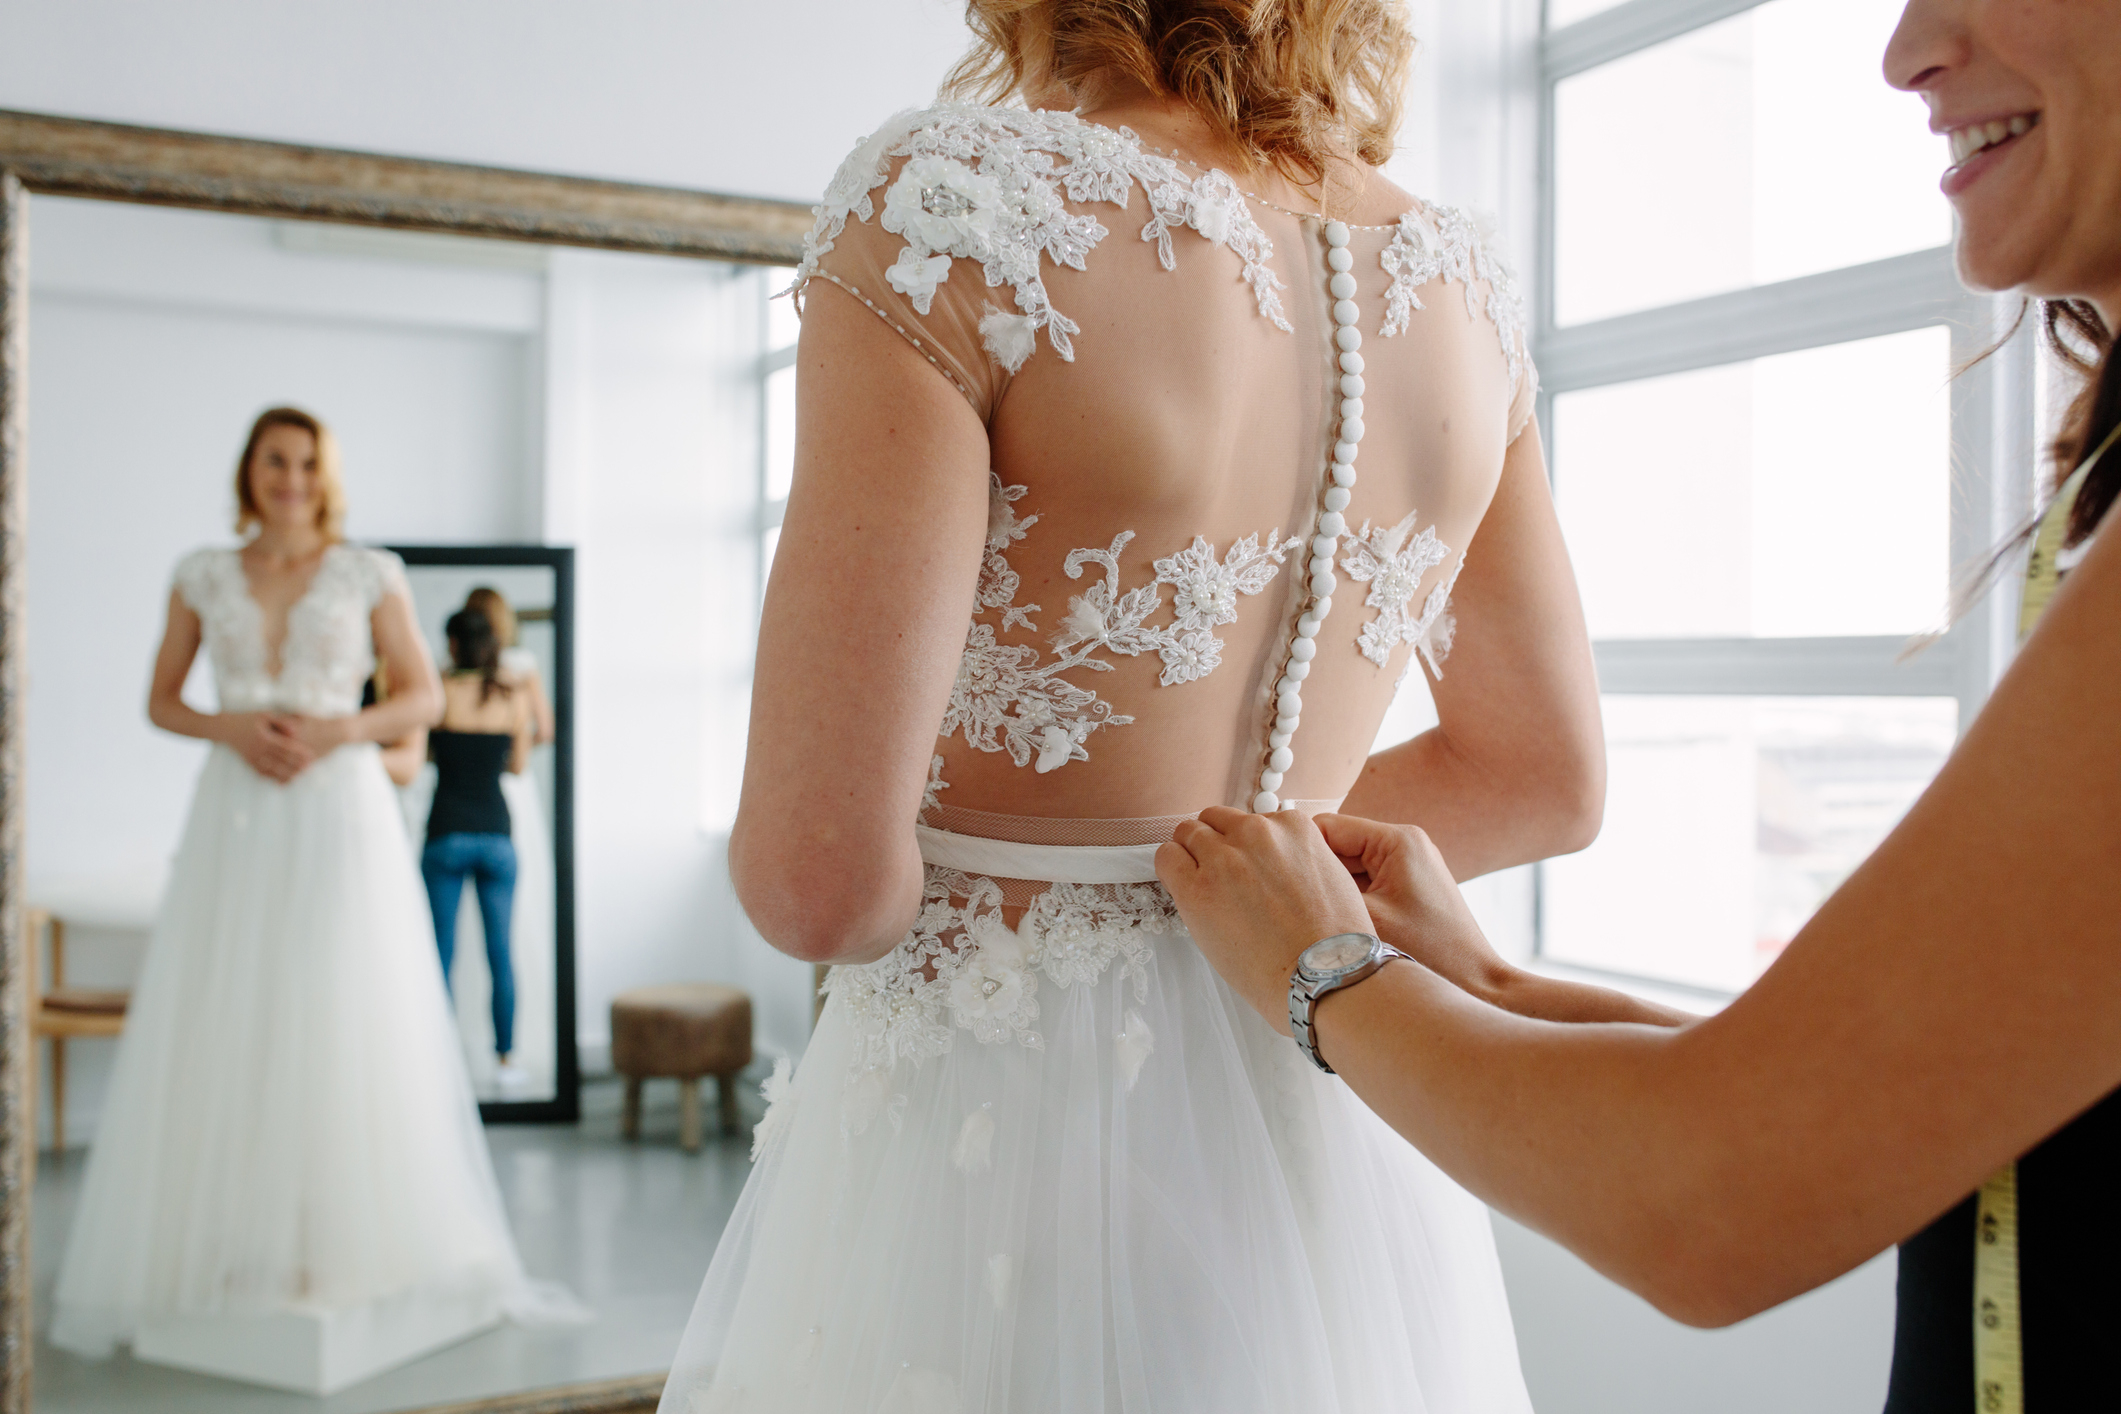 A woman helping a bride put on her wedding dress